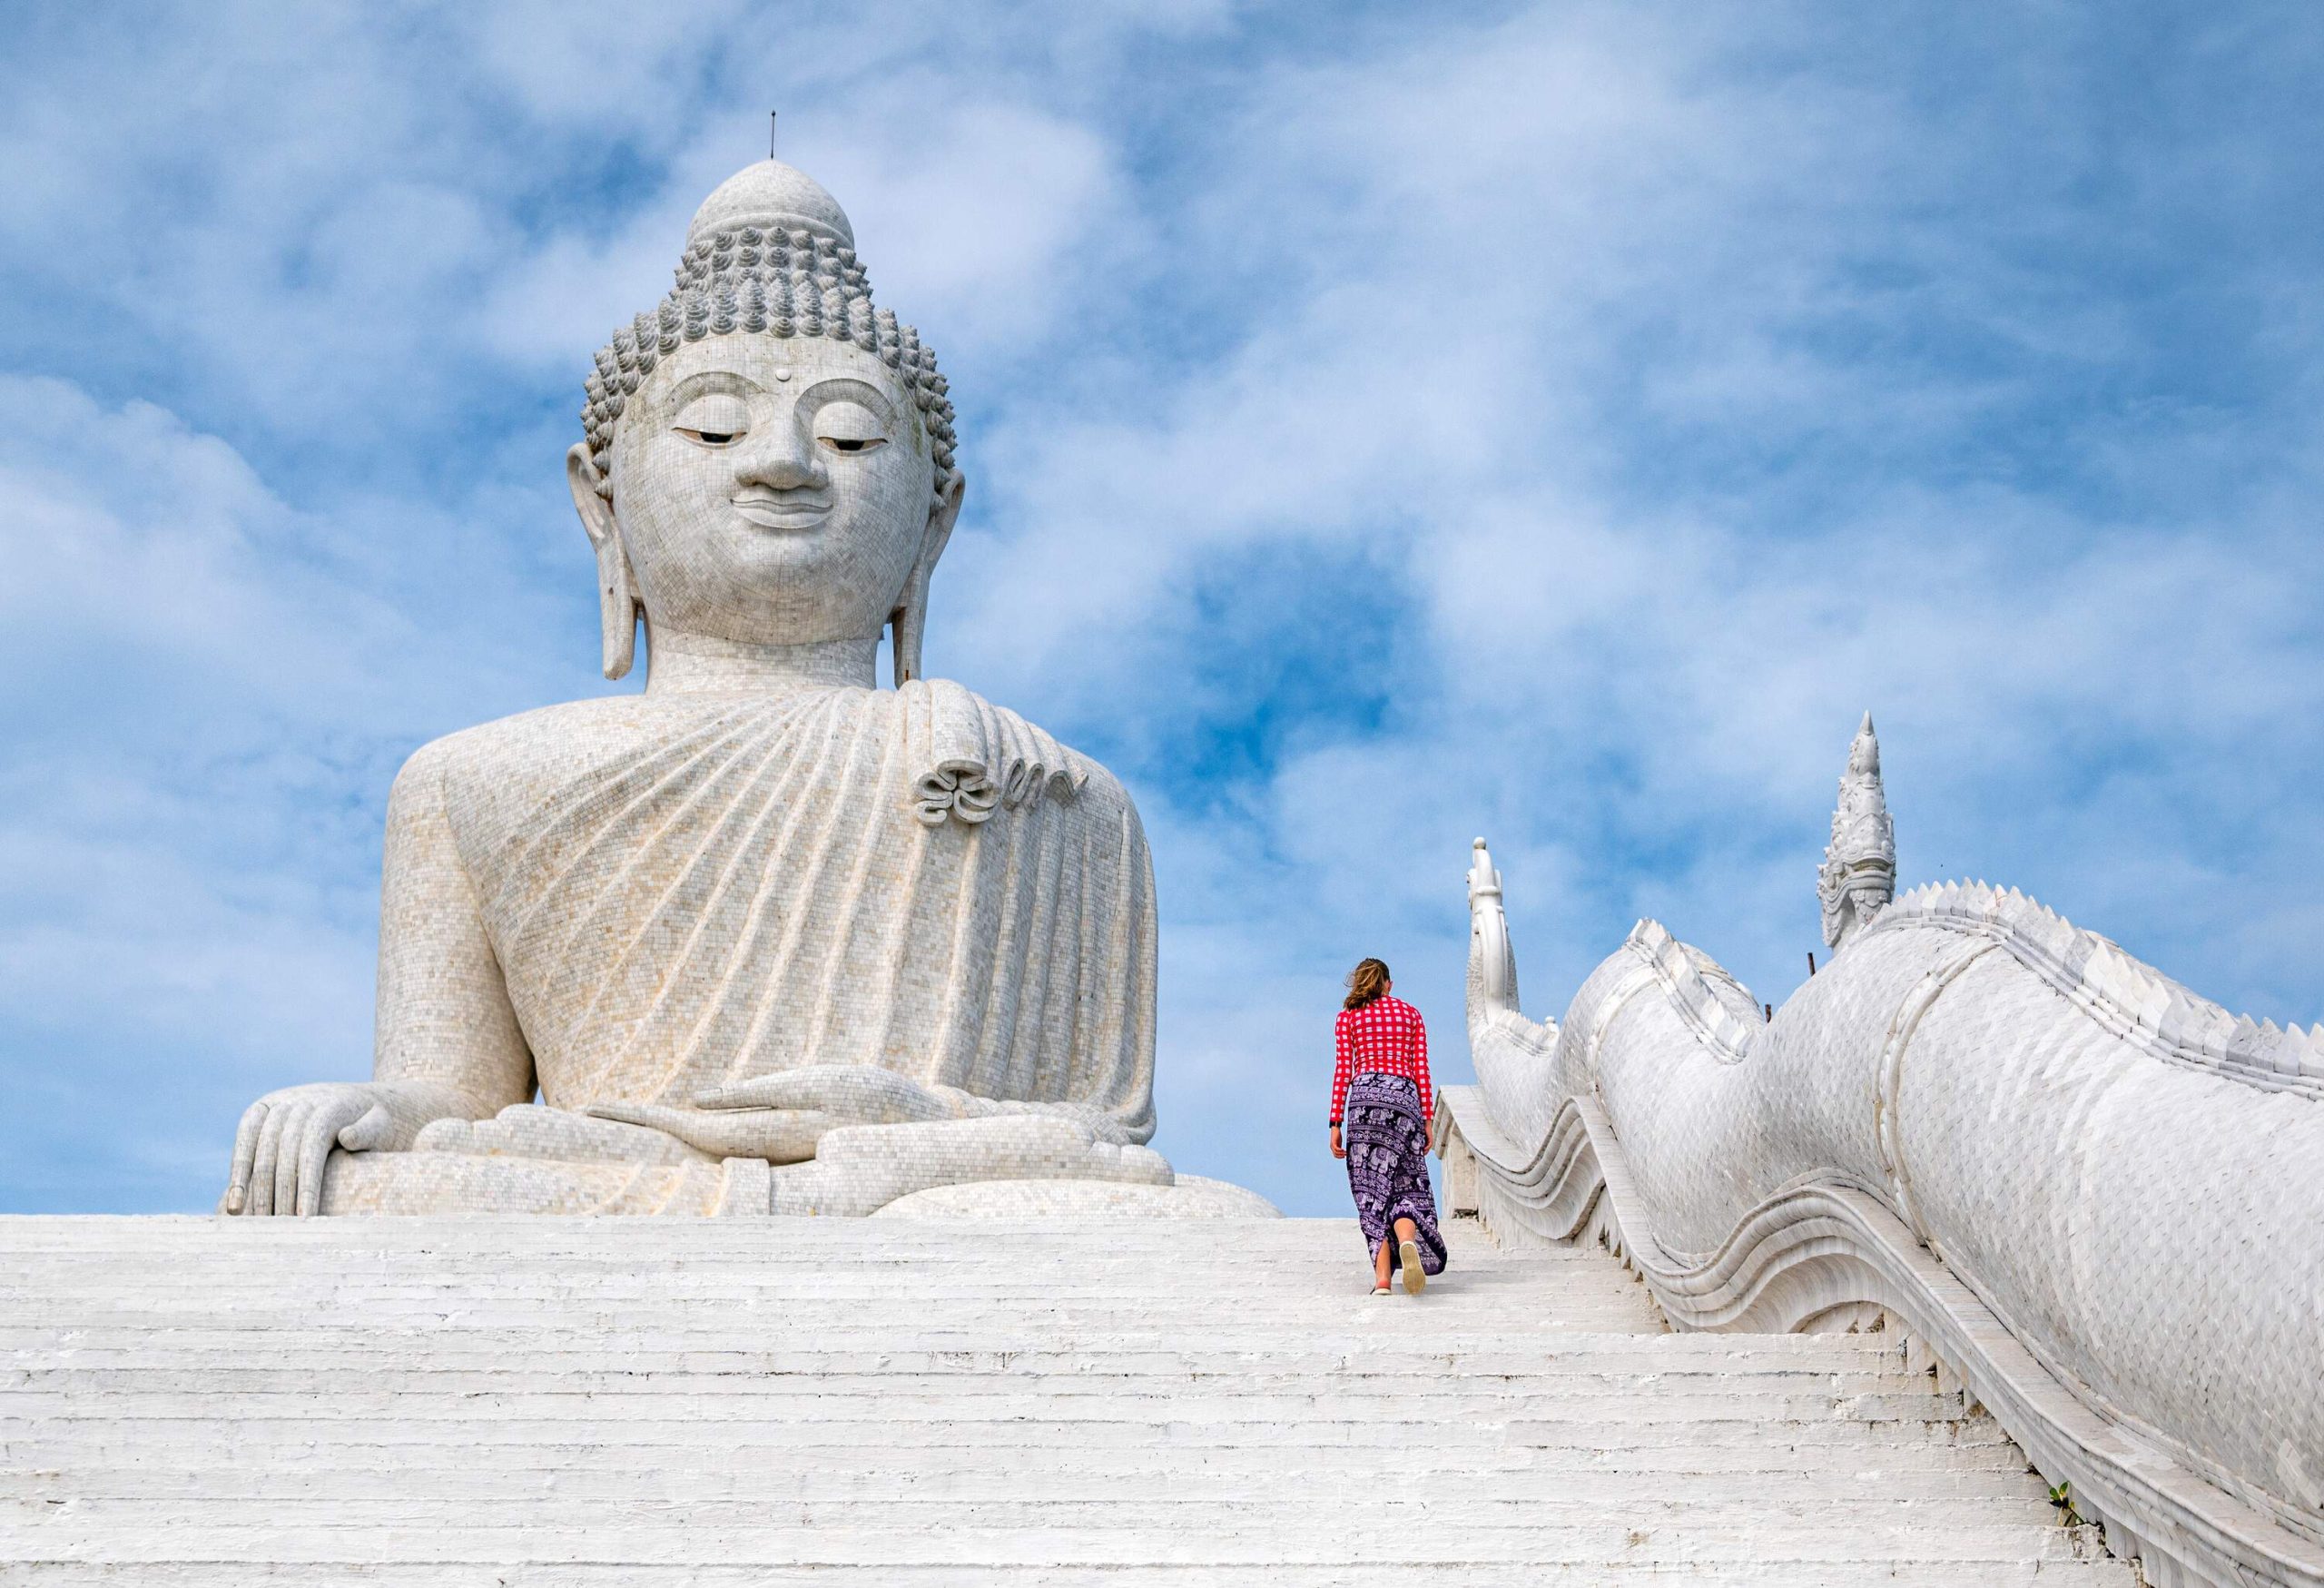 A young lady goes up the stairs to the Phuket Big Buddha statue made of white marble against the clouds in the sky.